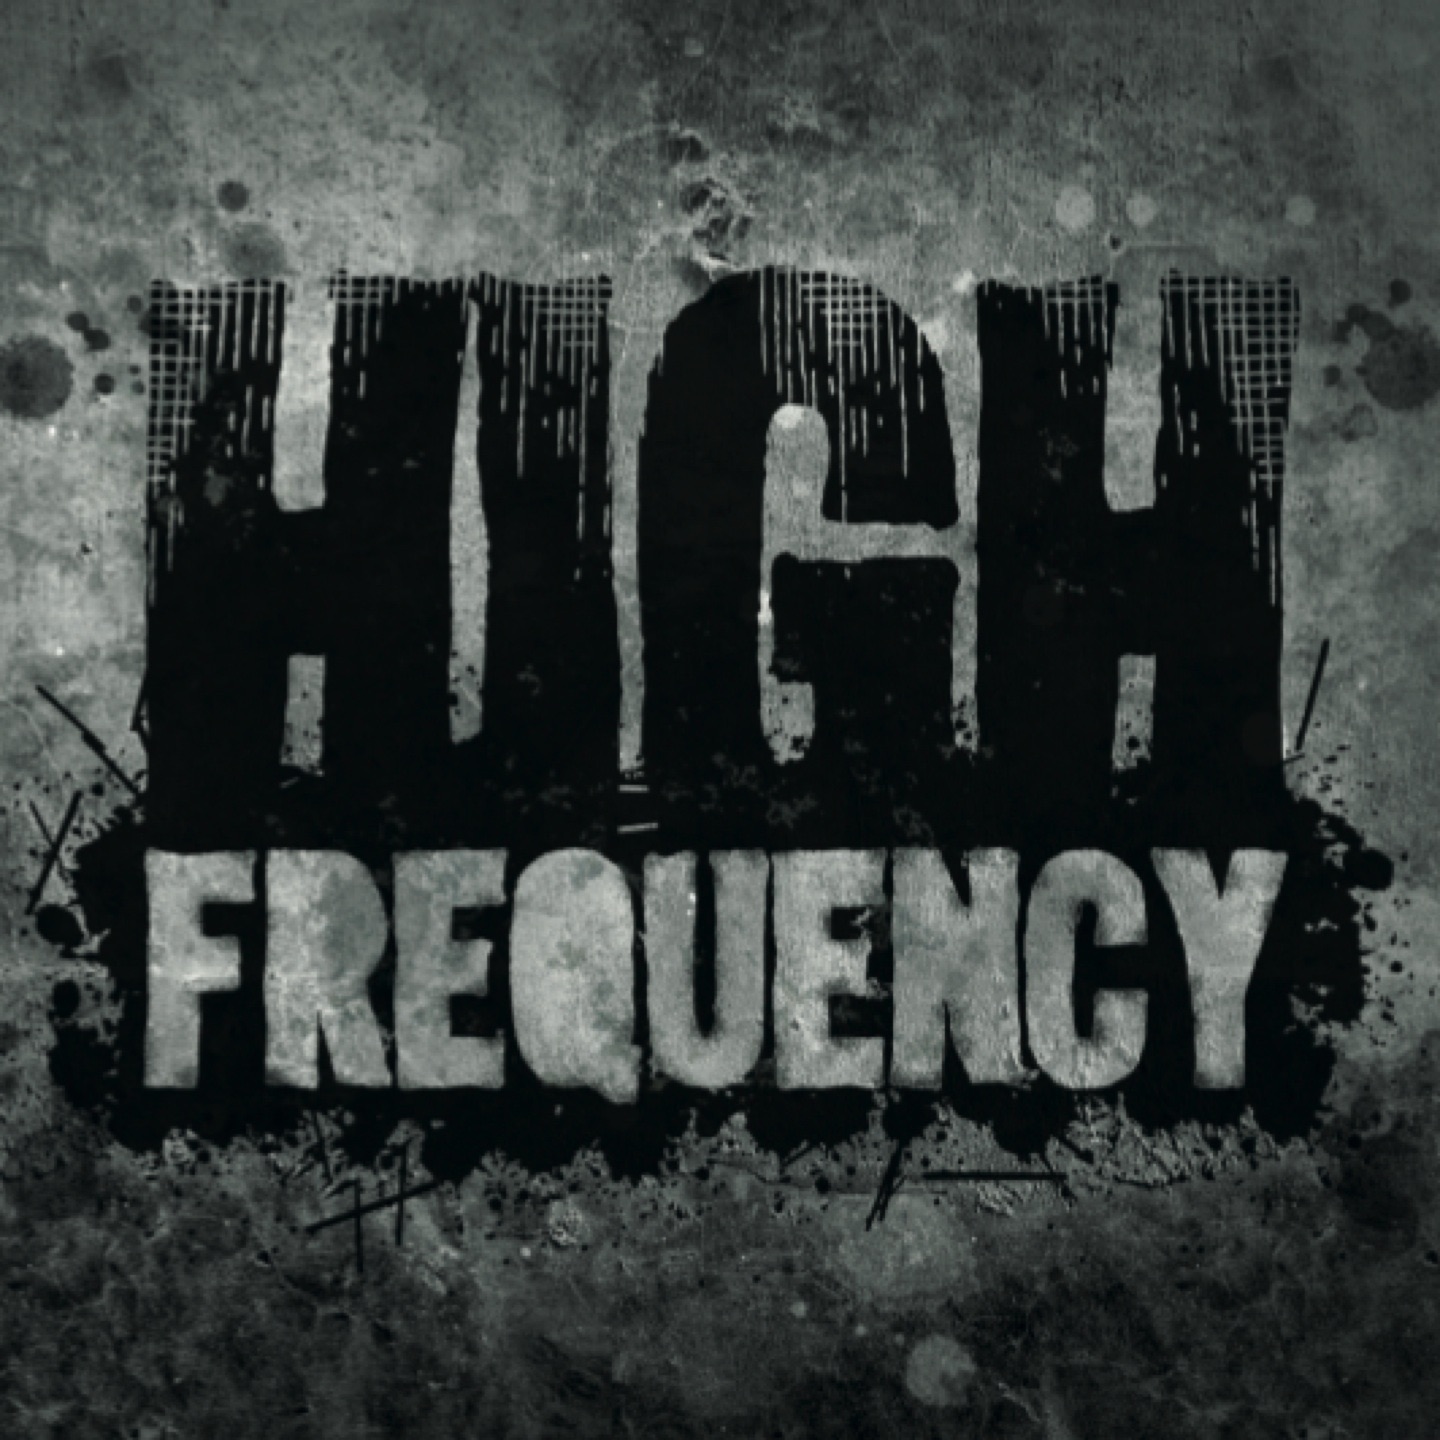 High Frequency [1988]